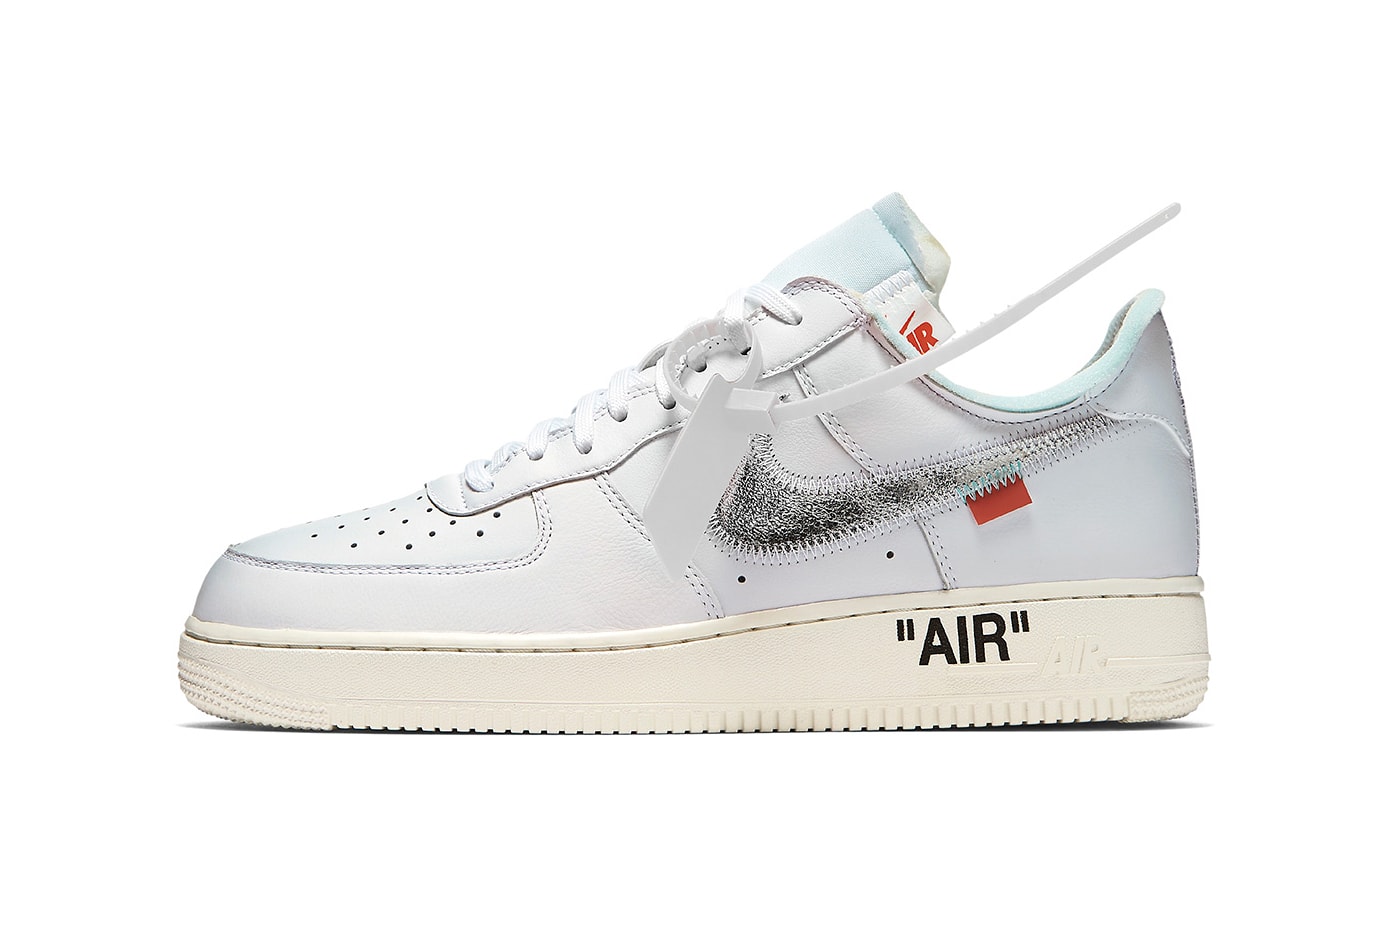 Nike x Off White Air Force 1 Low Virgil Abloh 'The 10 Ten